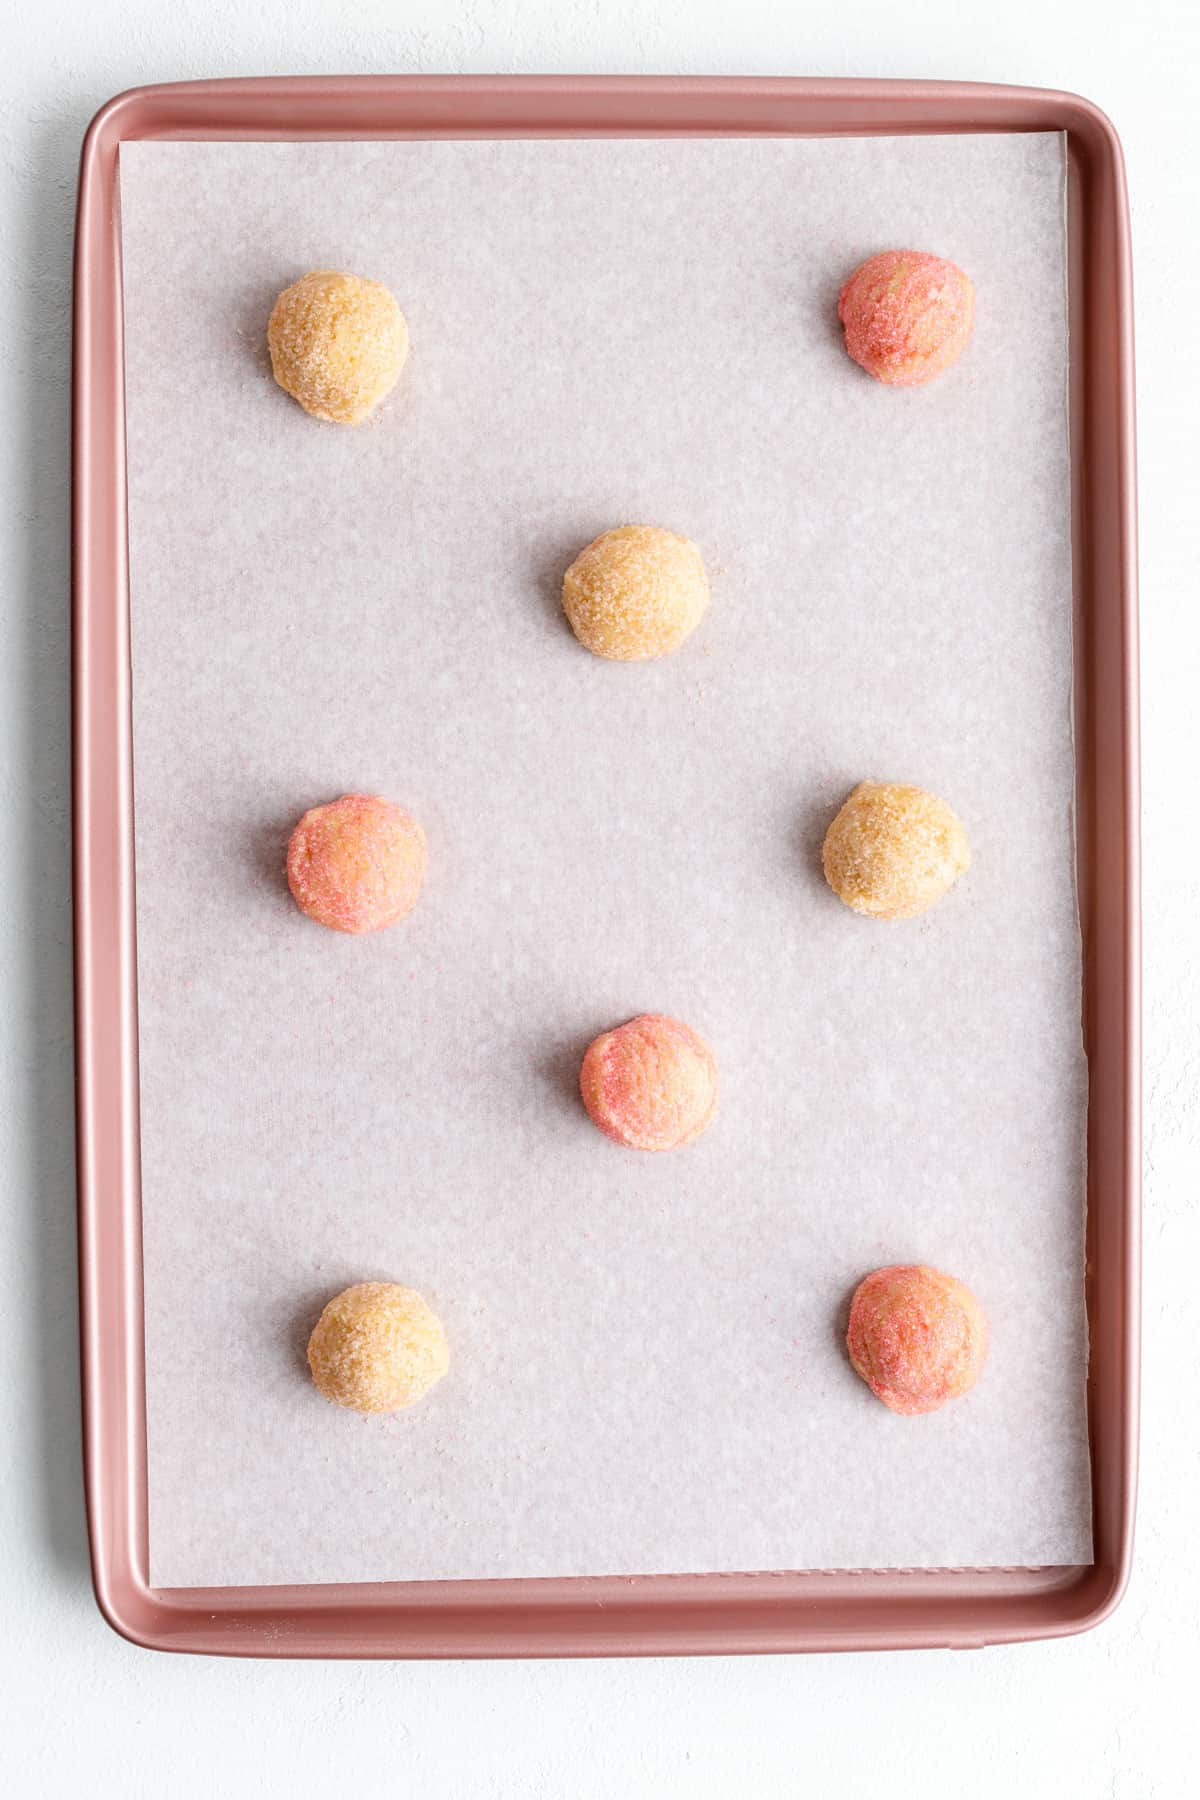 orange and pink sugar coated dough balls on a pink parchment-lined baking sheet.